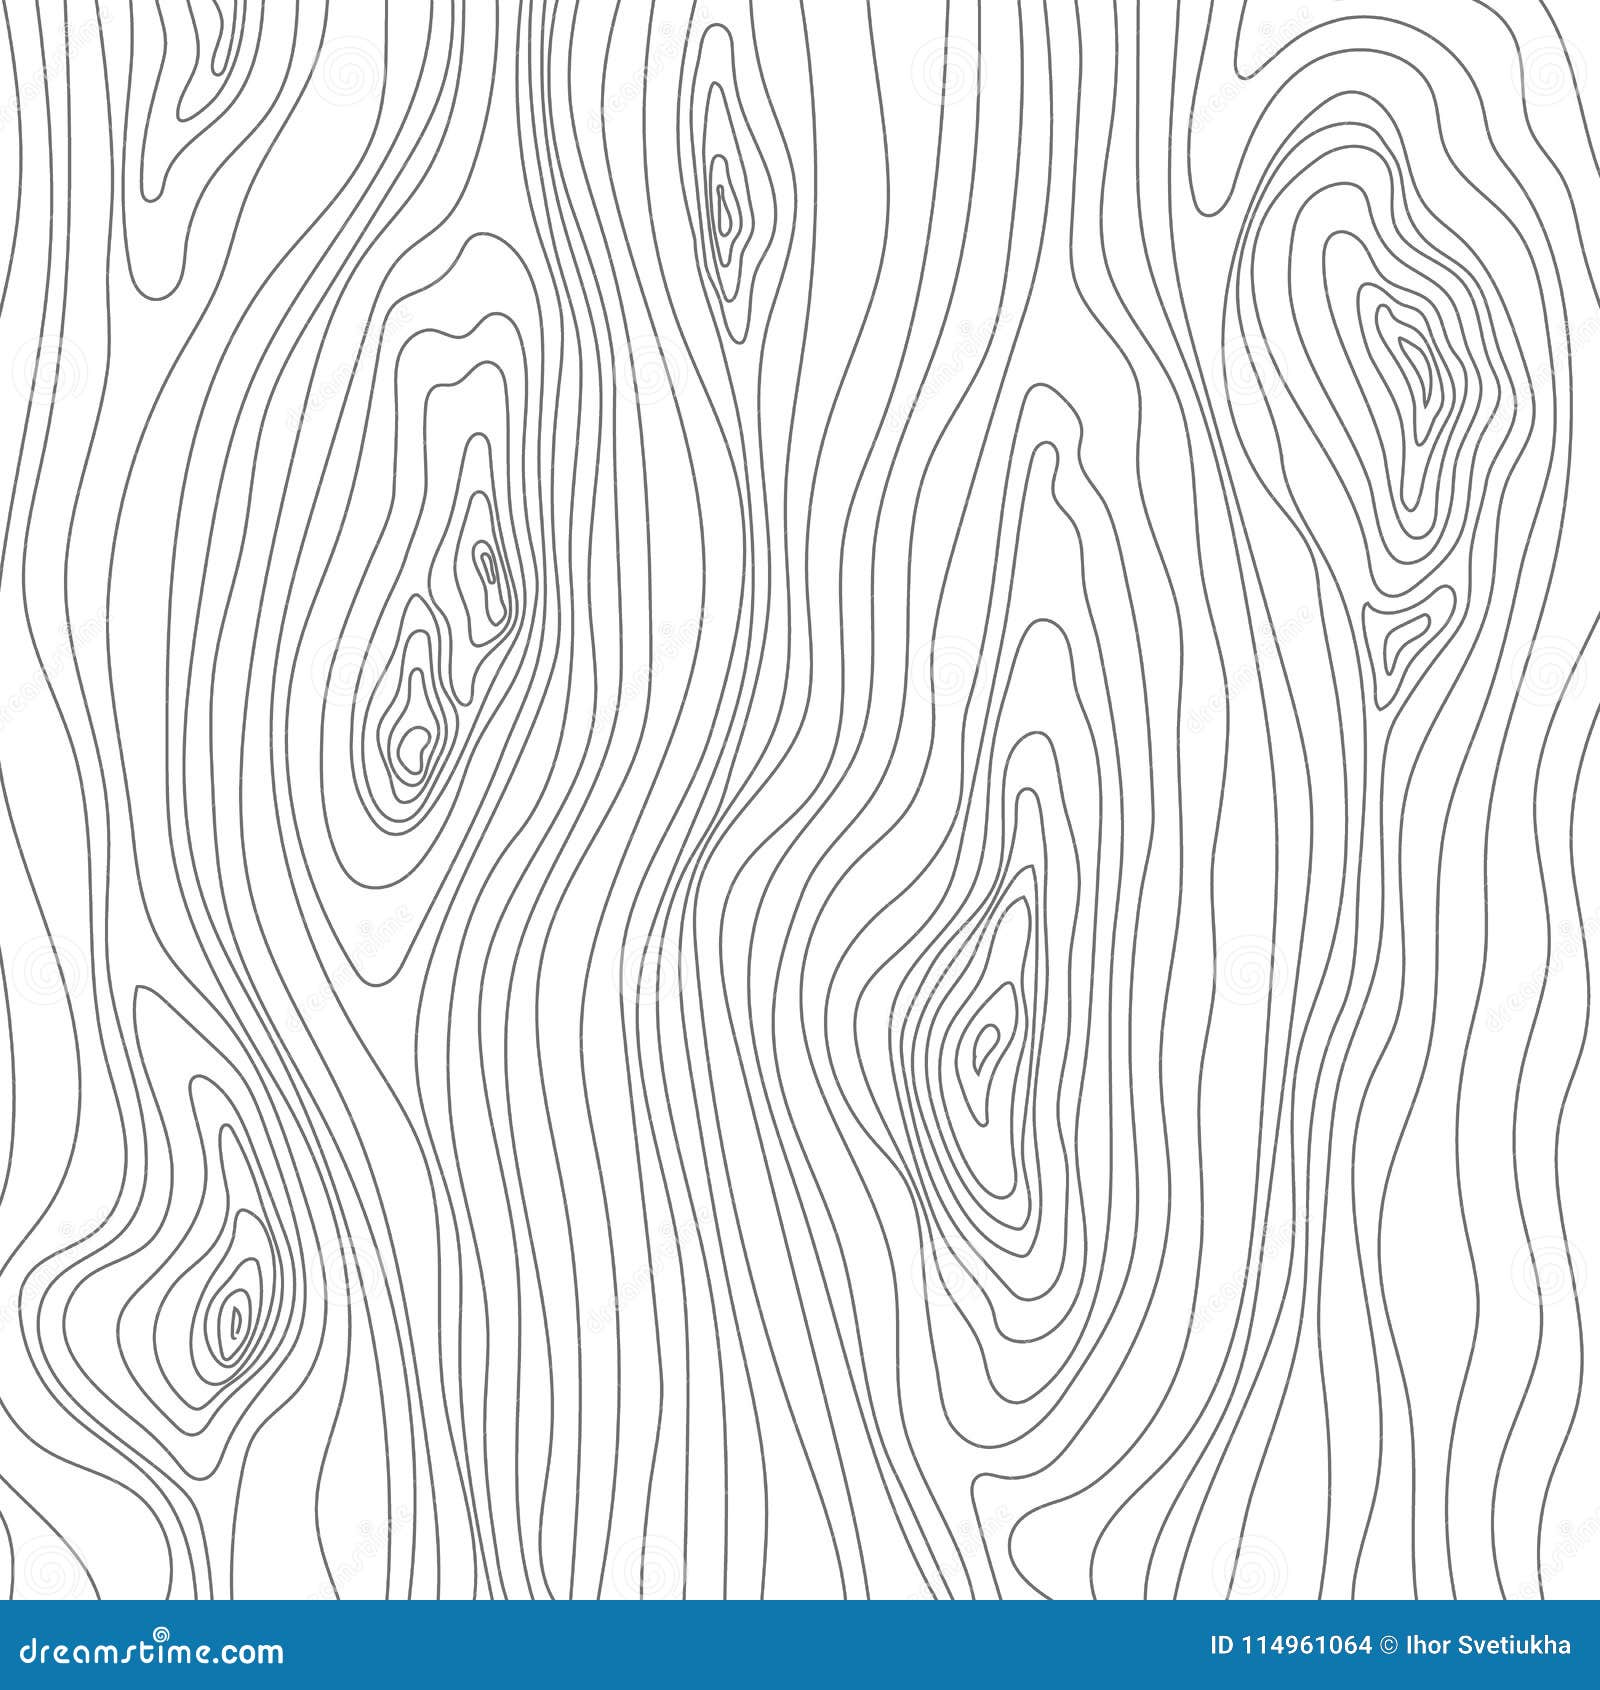 Wood Line Texture Drawing Vector (EPS, SVG, PNG Transparent) | OnlyGFX.com